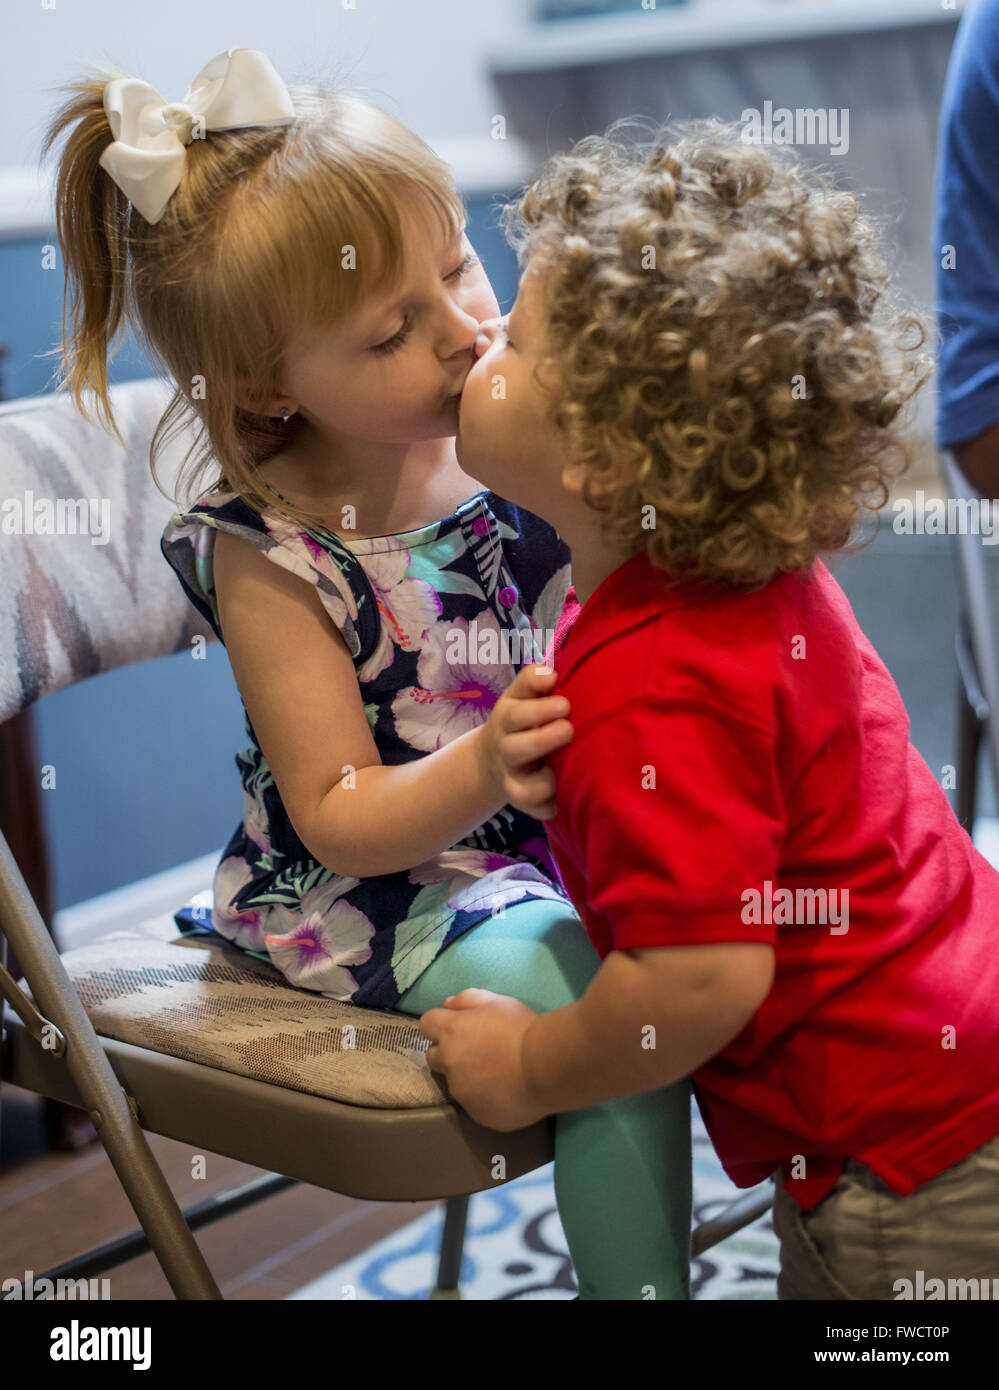 La Habra, California, USA. 3rd Apr, 2016. During her family birthday party, DELANEY CHAMBERS, 4, of La Habra, California, gets a kiss from her 20-month-old cousin, BRAXTON CHAMBERS. © Bruce Chambers/ZUMA Wire/Alamy Live News Stock Photo